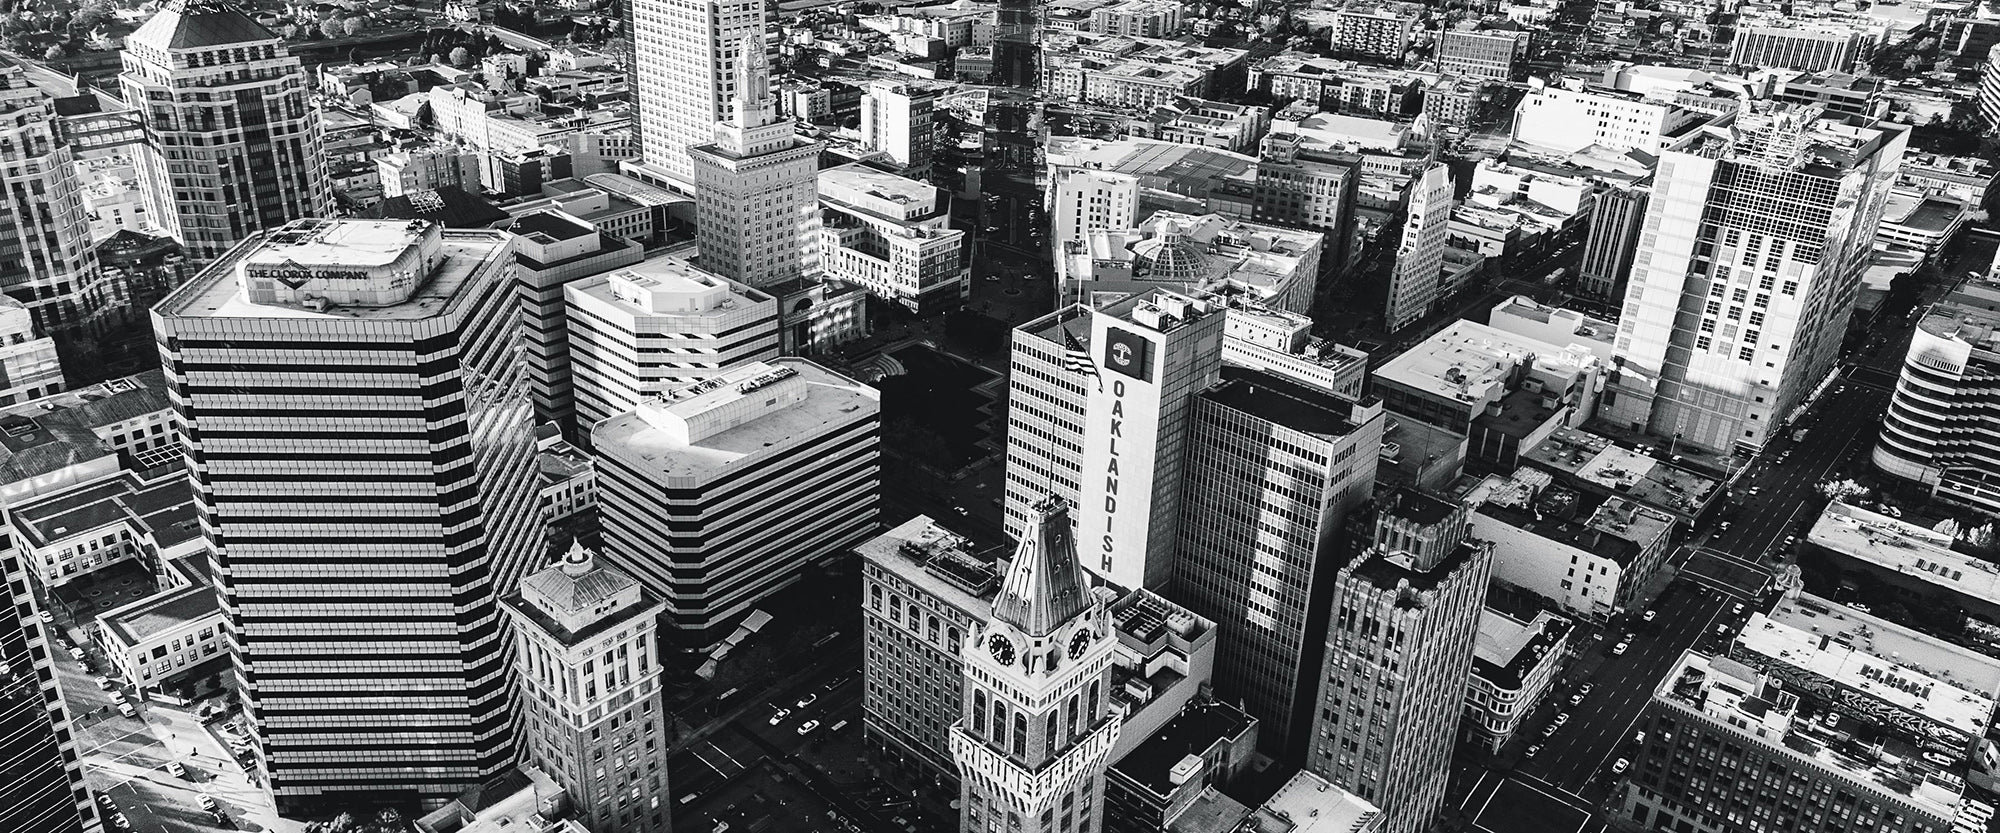 Black and white image of Oakland skyline with a building with Photoshopped Oaklandish branding.